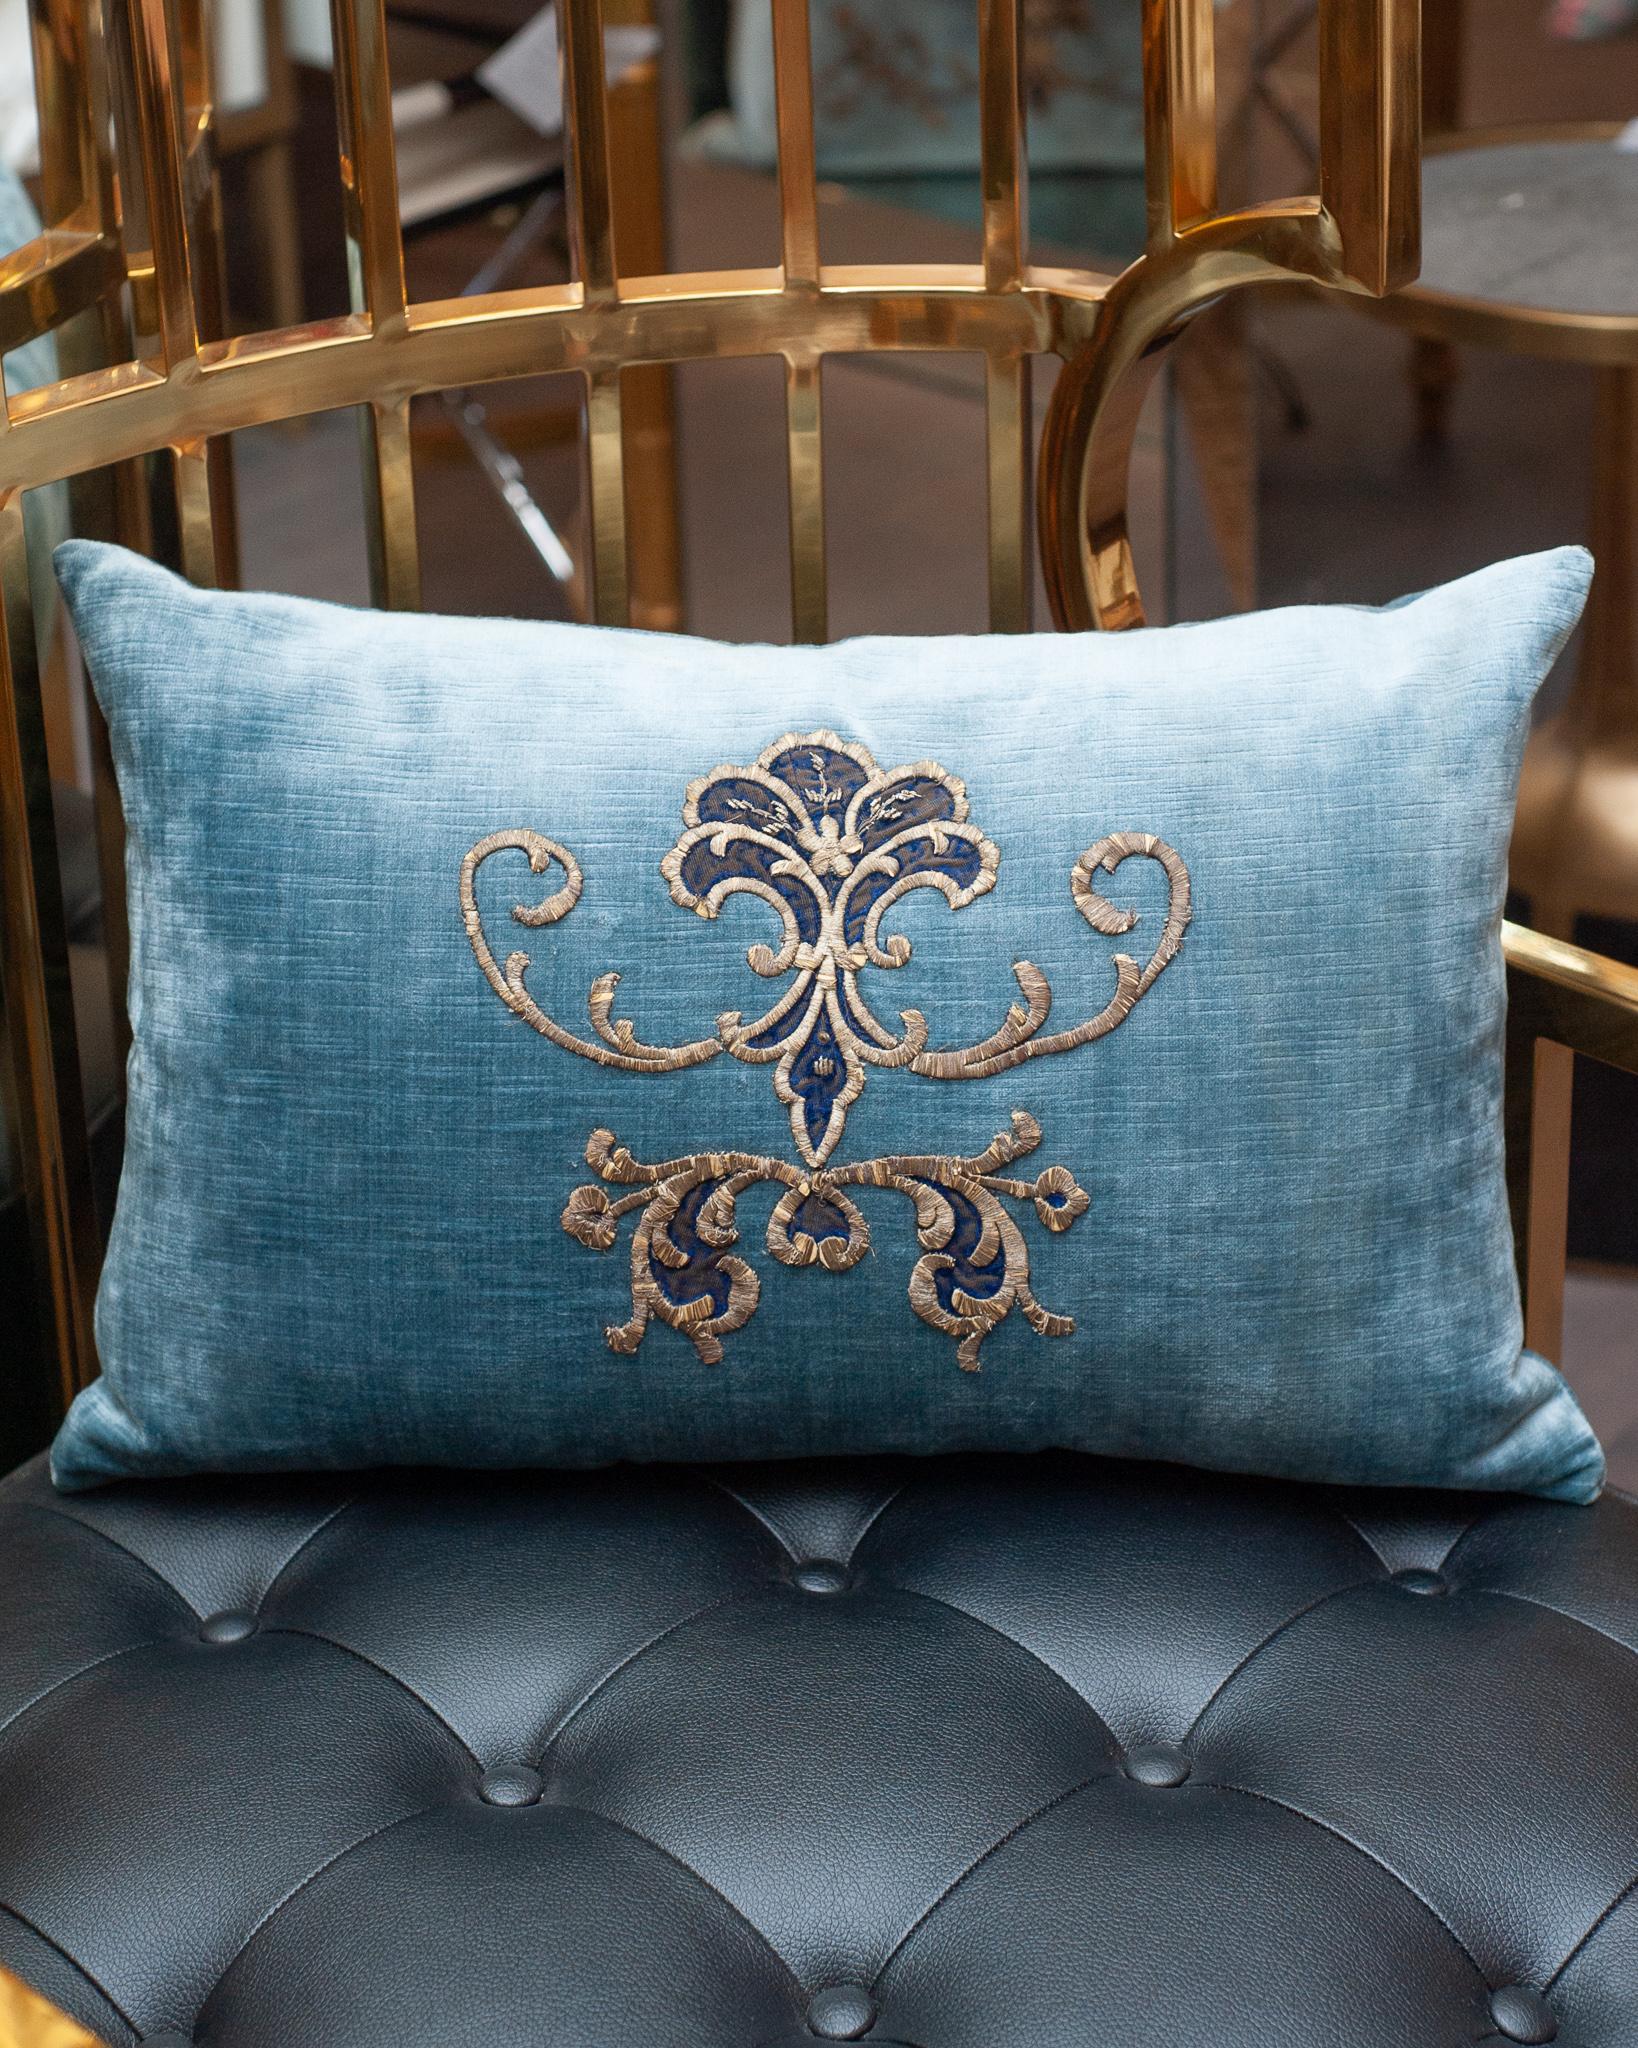 A stunning medium blue velvet pillow with hand-stitched Antique Ottoman metallic embroidery. Filled with a down and feather insert for a pillow that is as soft and luxurious as it is beautiful.